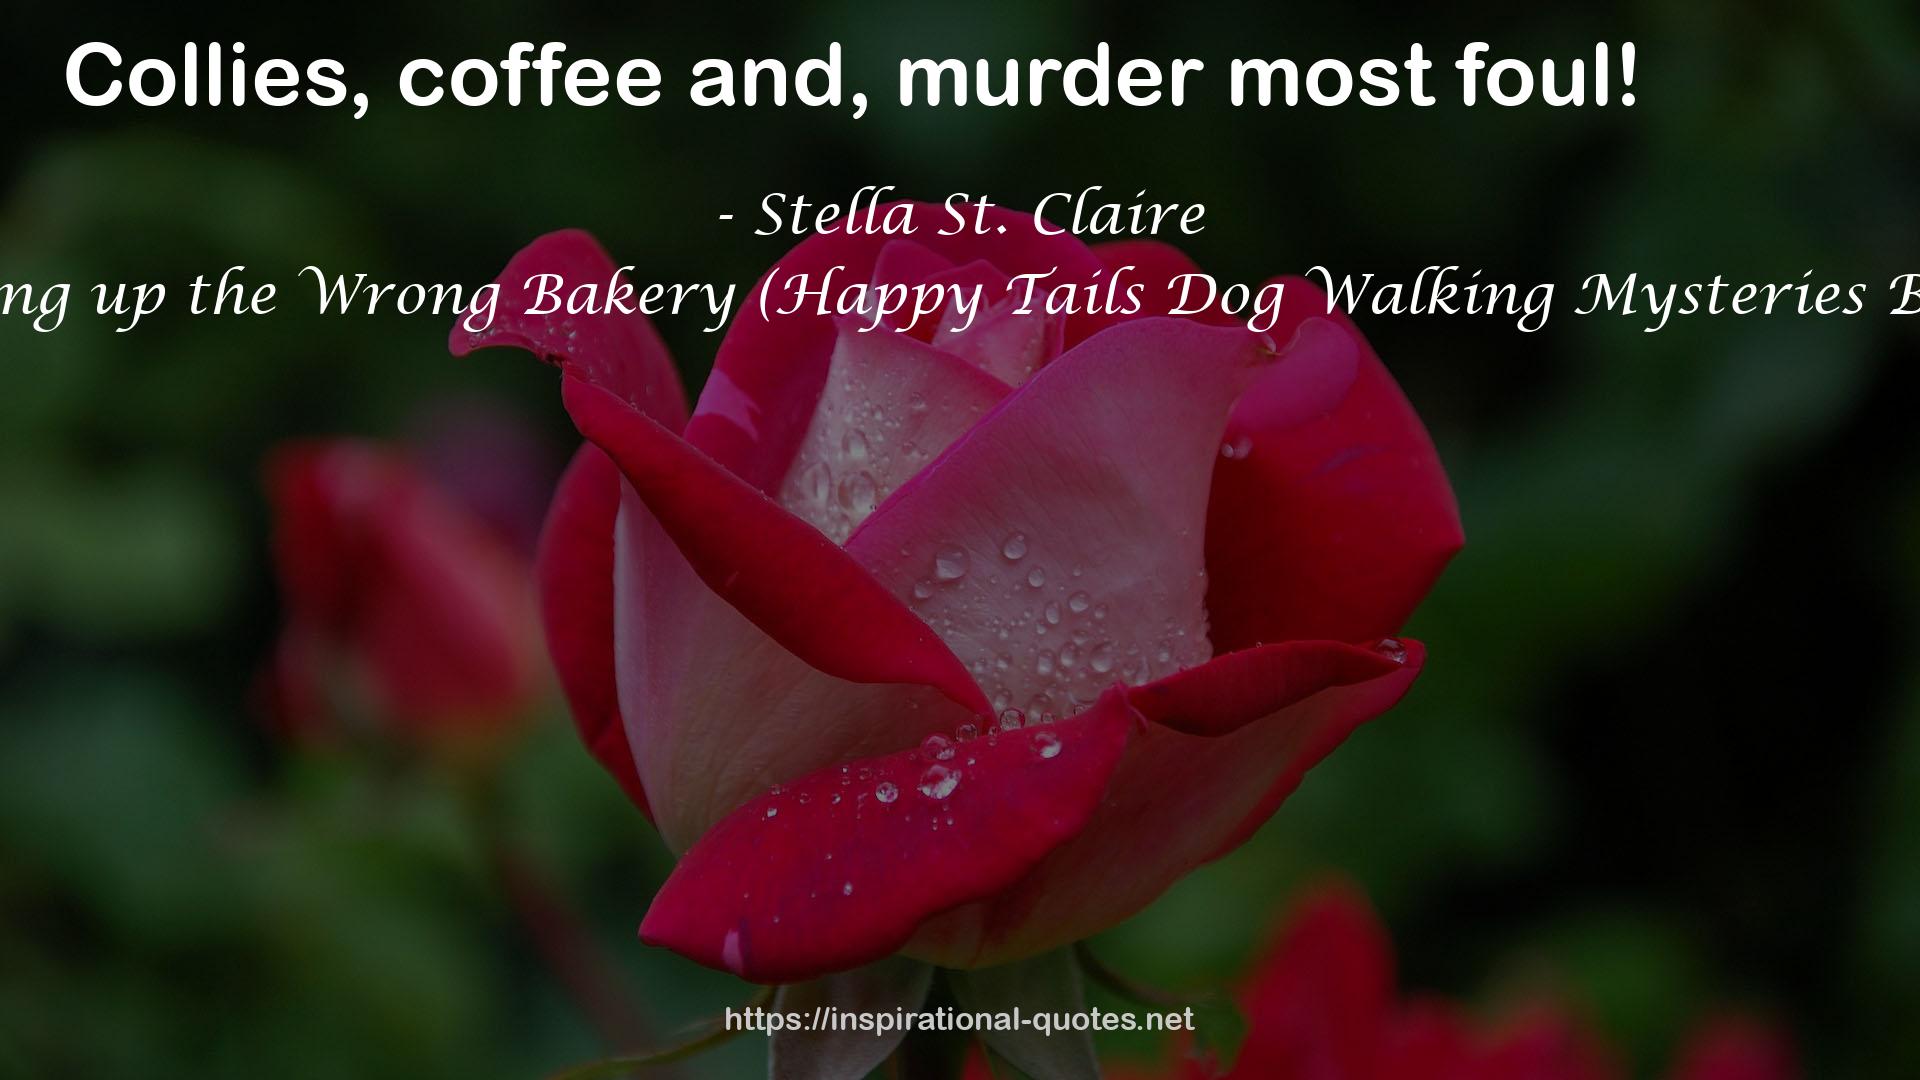 Barking up the Wrong Bakery (Happy Tails Dog Walking Mysteries Book 1) QUOTES